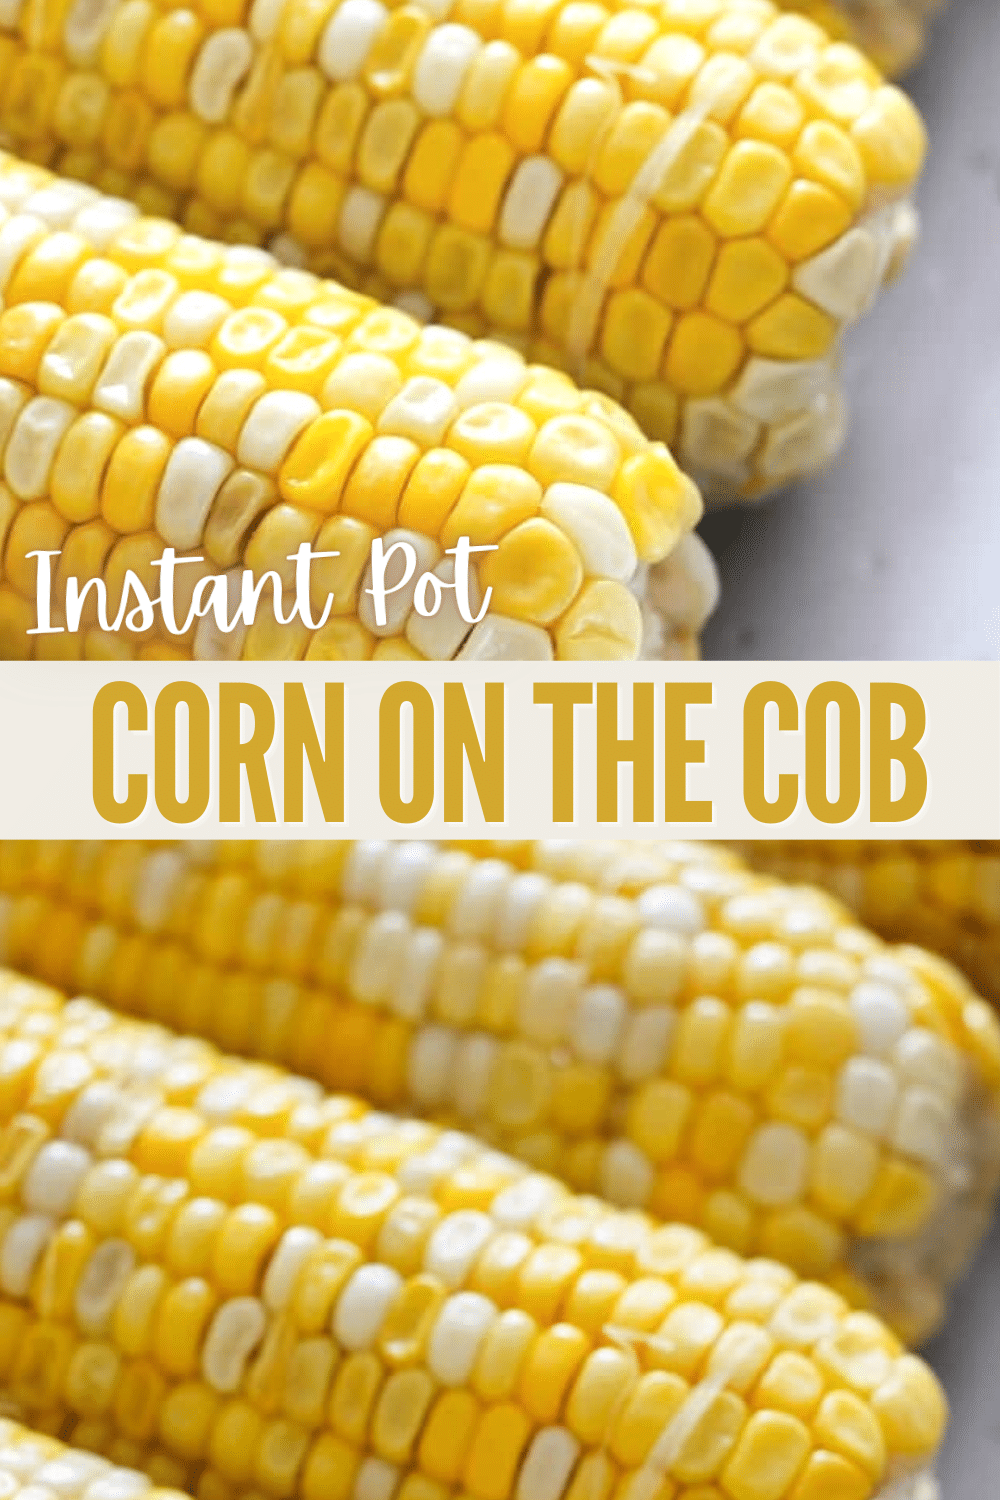 This Instant Pot Corn on the Cob is so much tastier than ordinary corn on the cob. You have to try this super easy recipe! #instantpot #pressurecooker #cornonthecob via @wondermomwannab